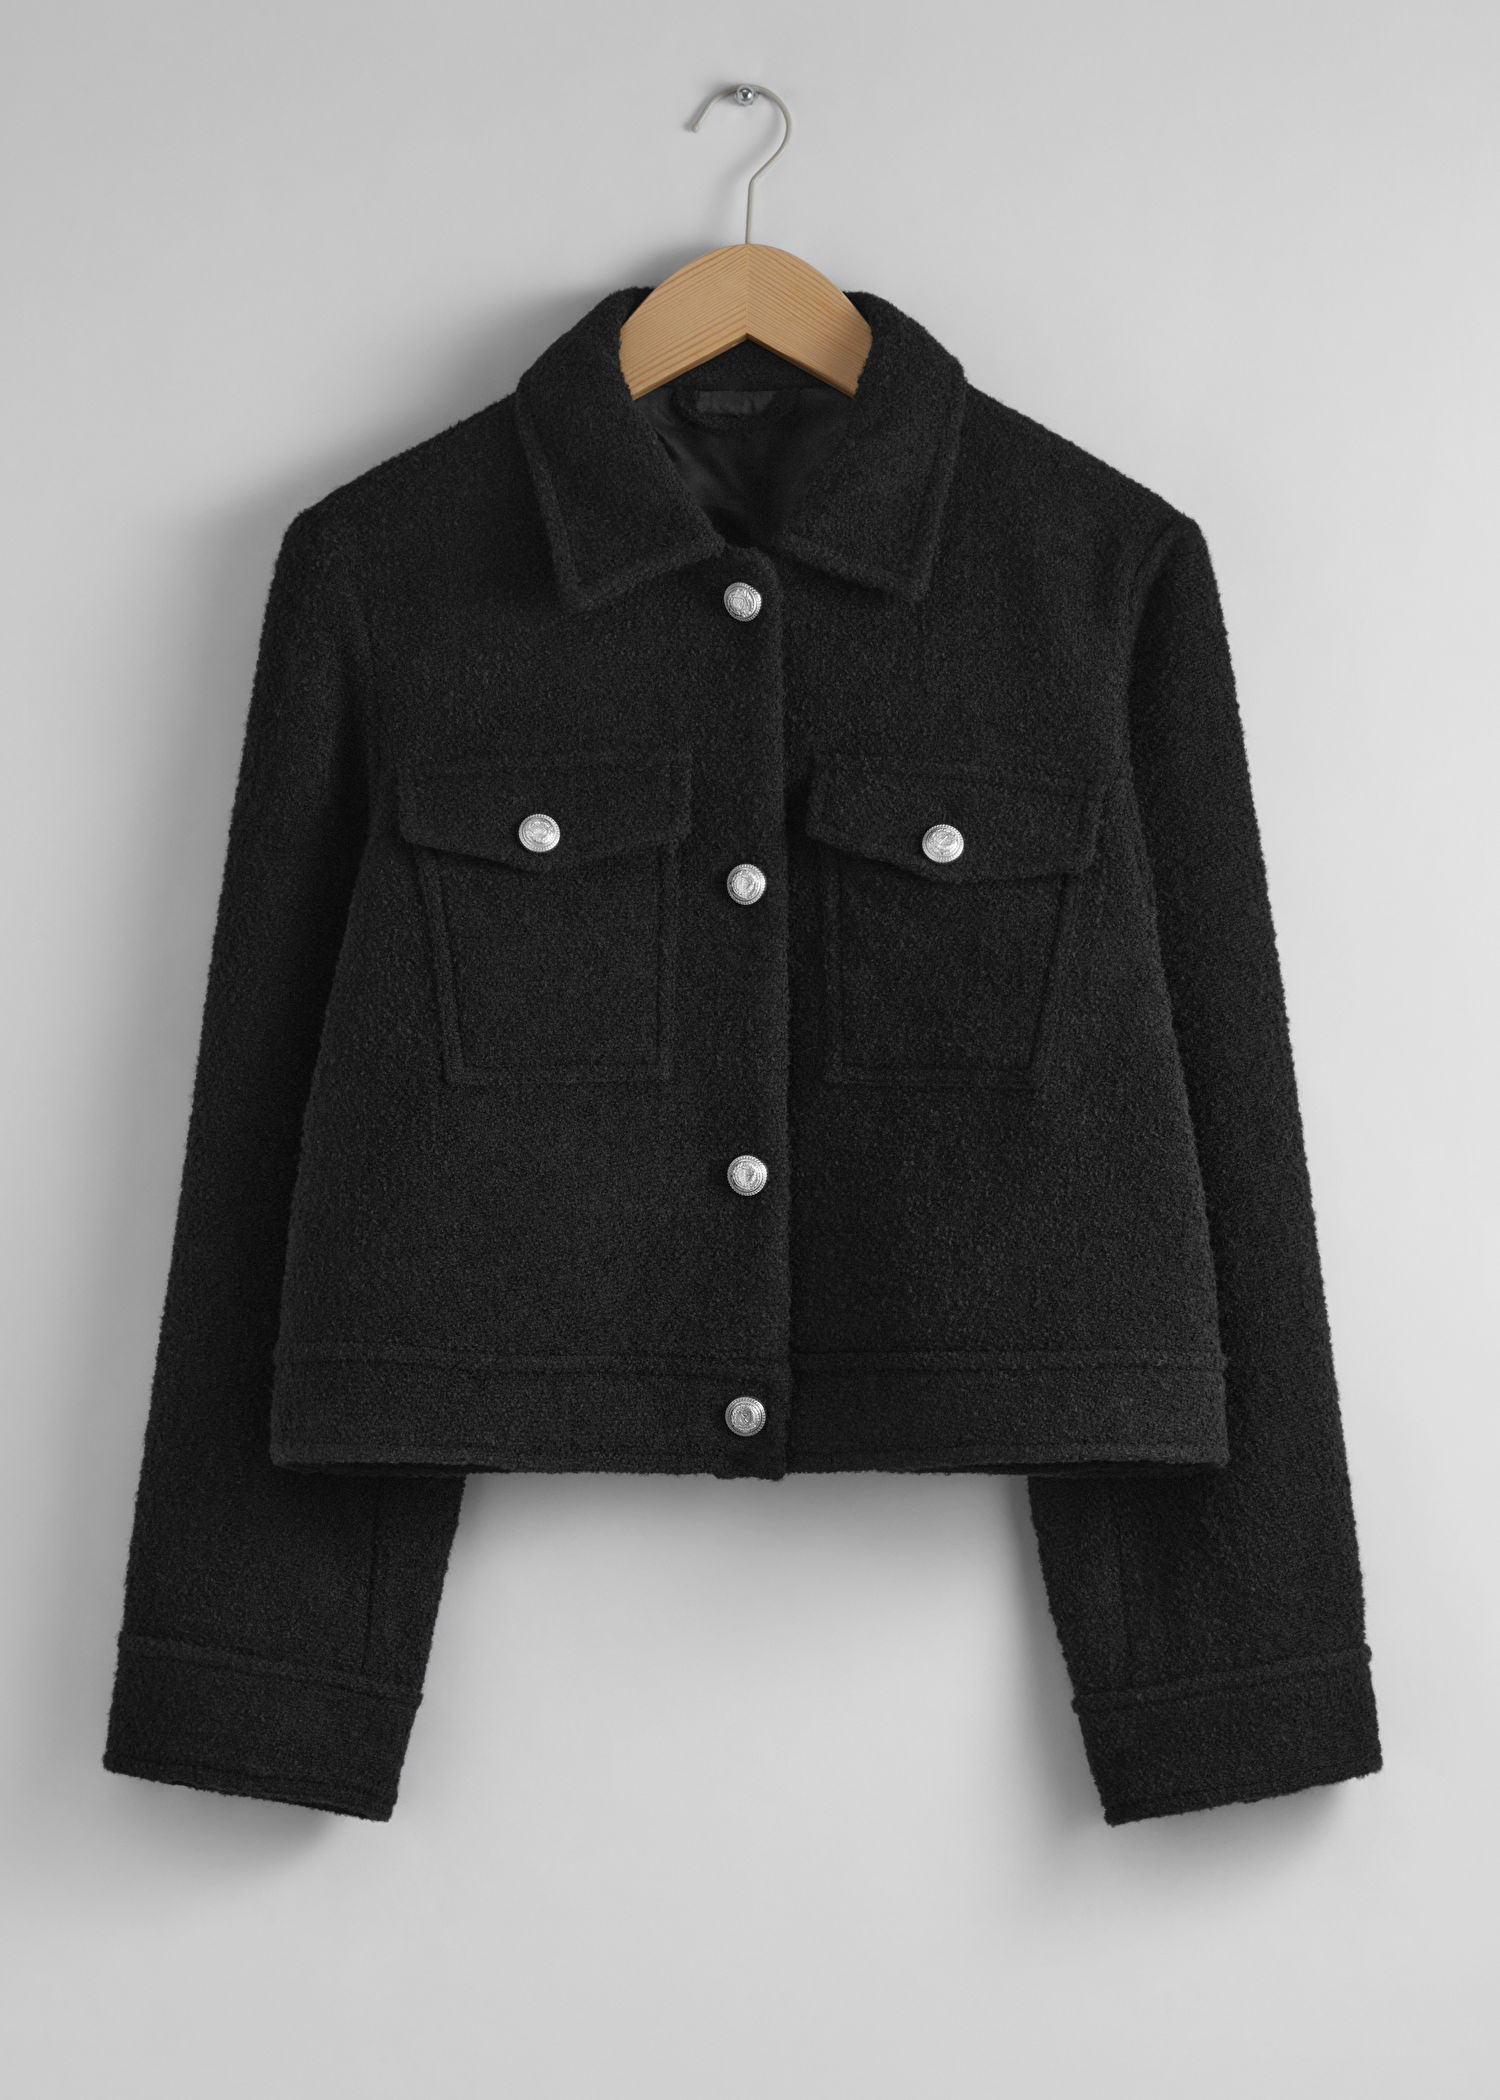 & Other Stories Boucle Jacket